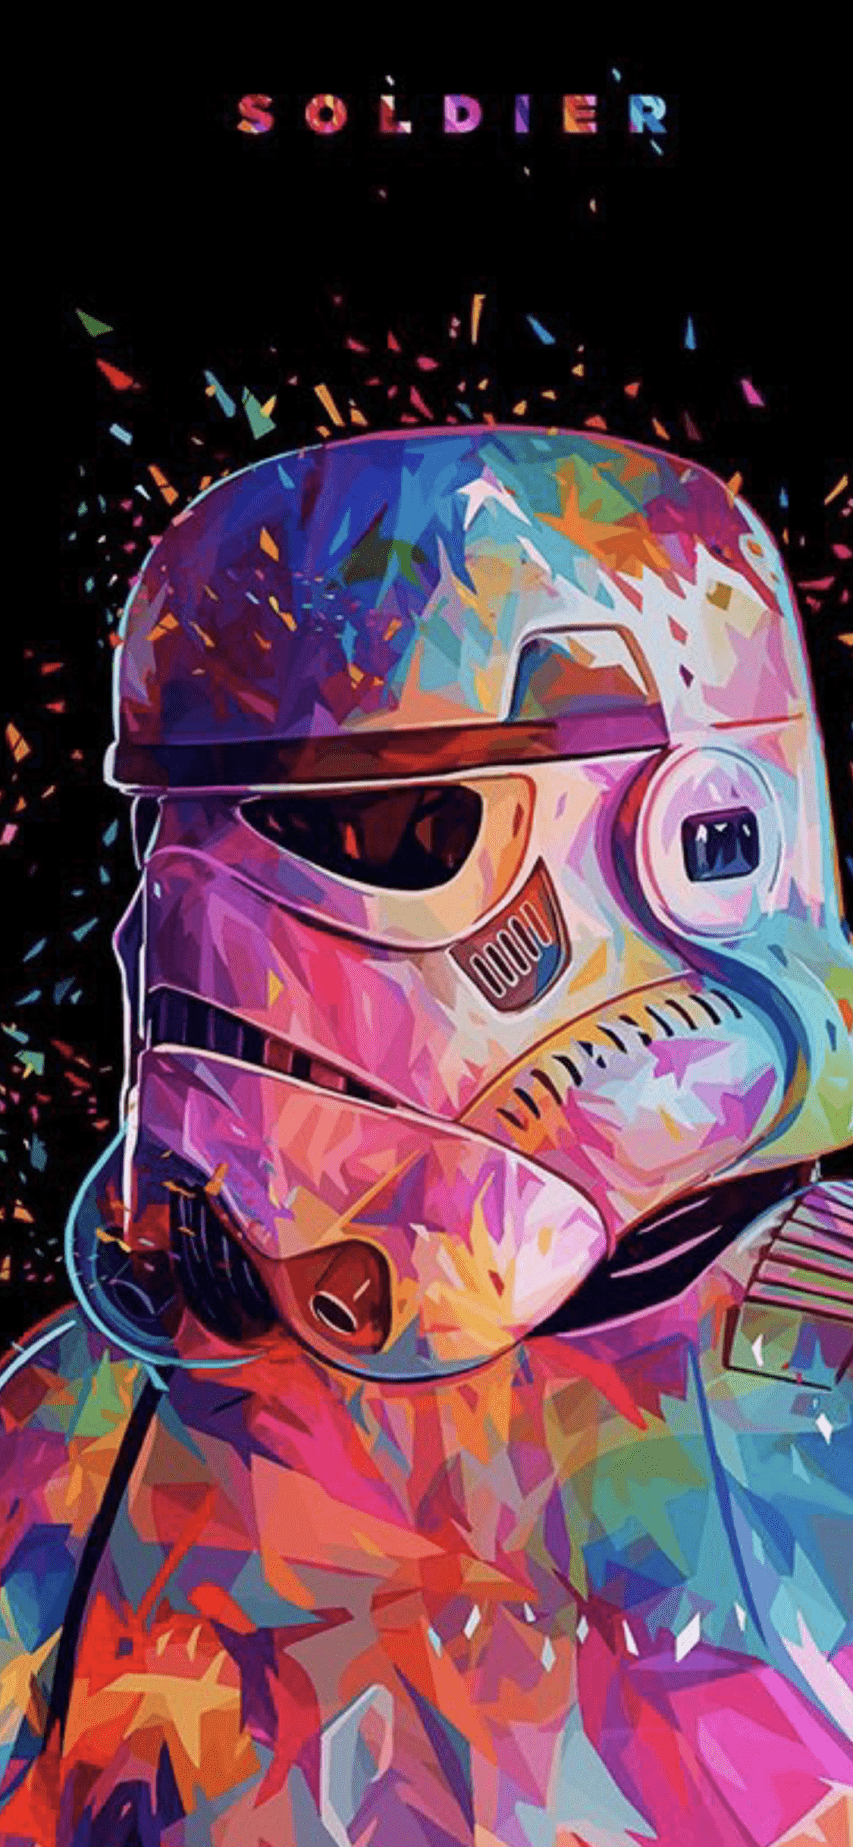 A poster of star wars stormtrooper in colorful art - Star Wars